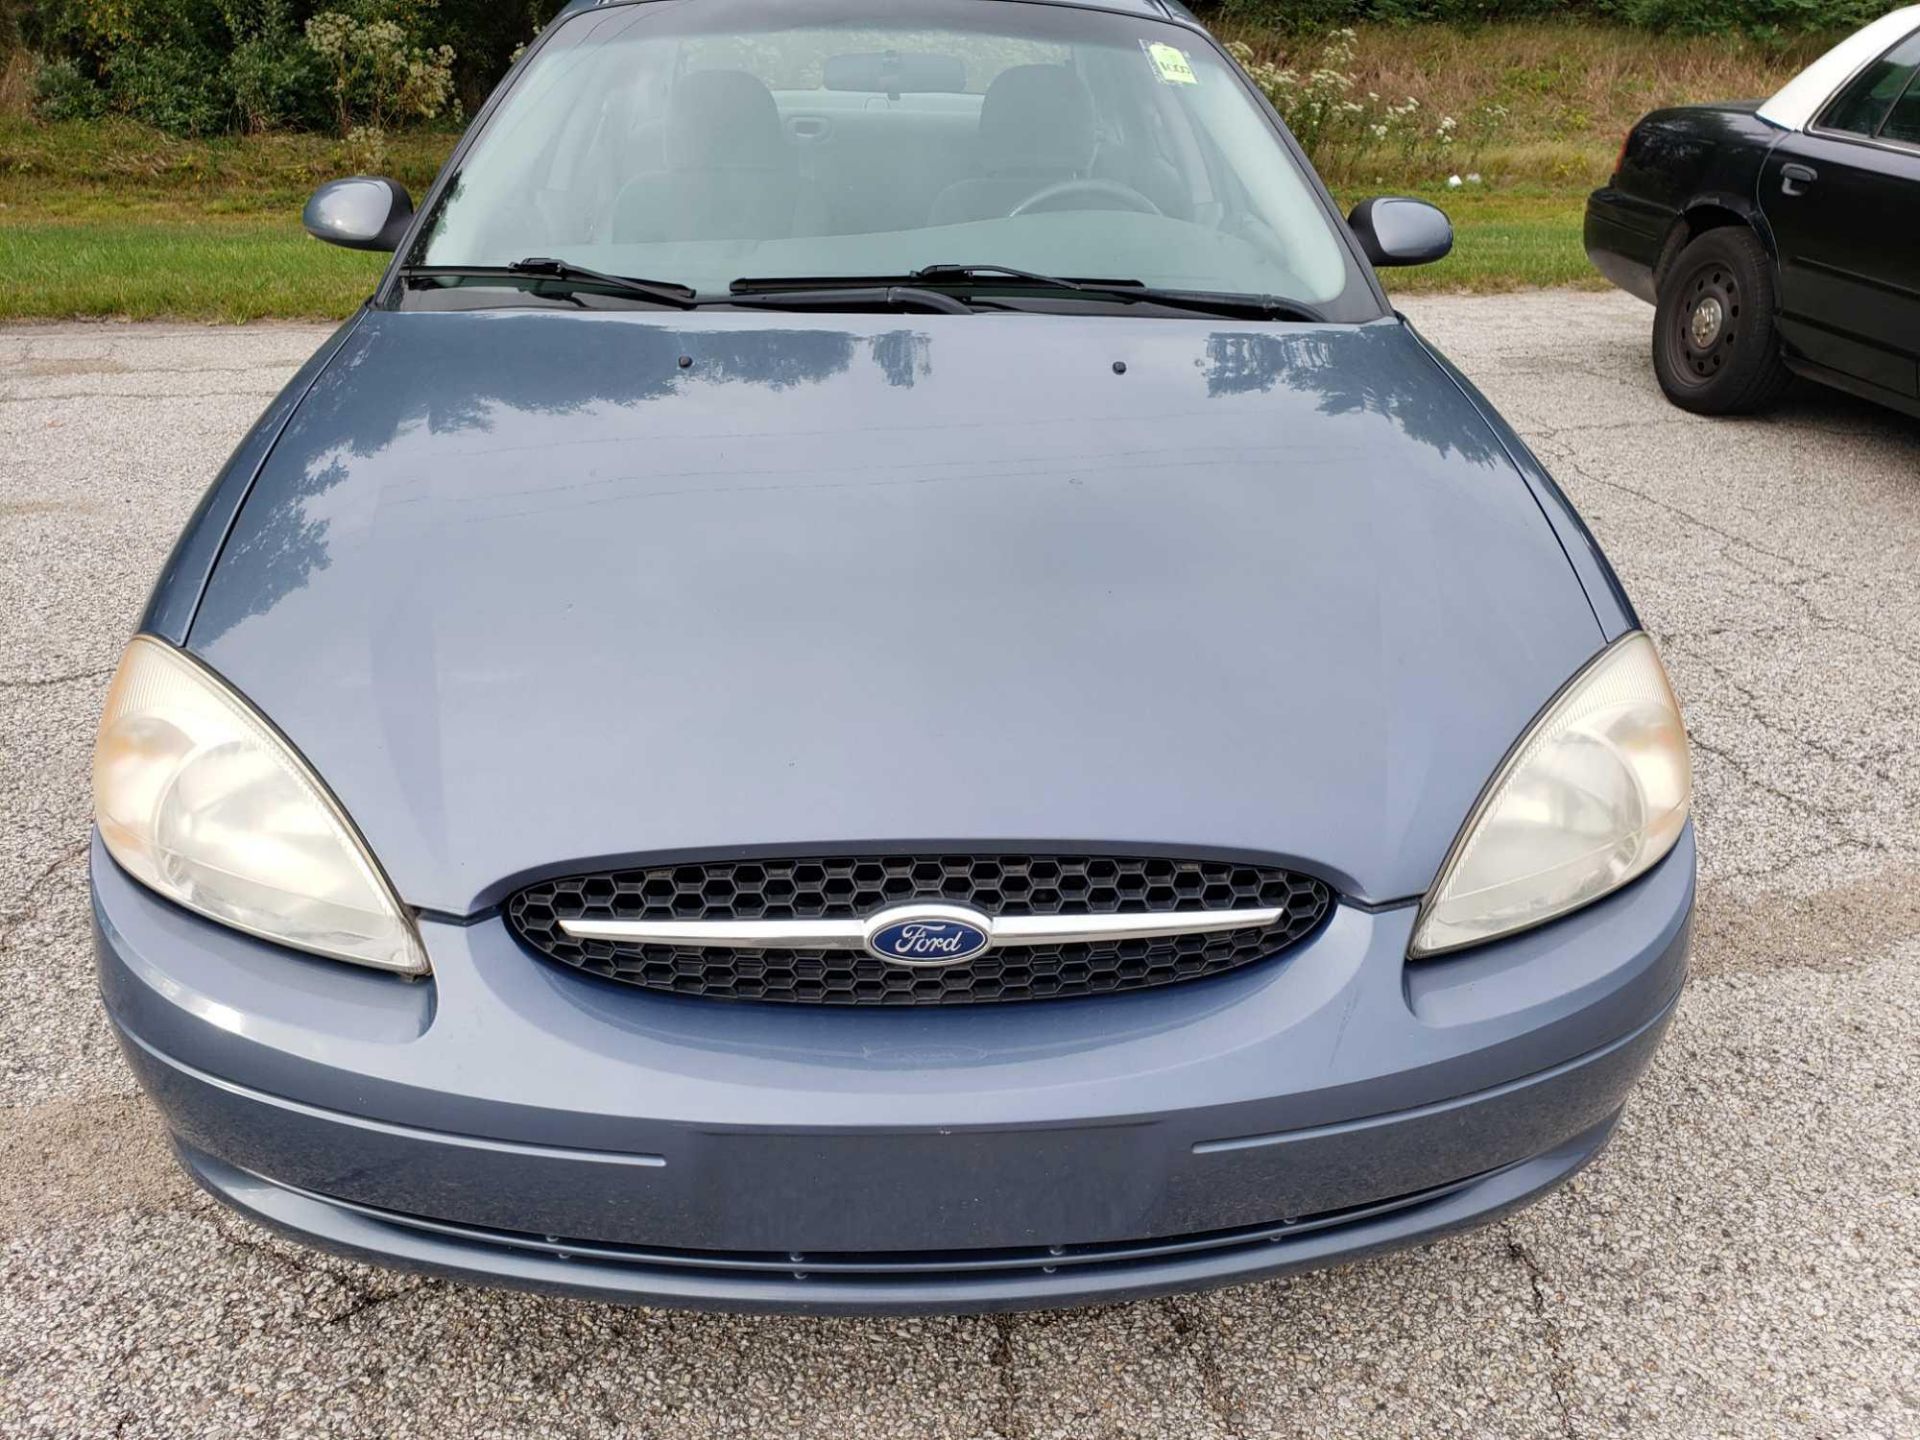 2001 Ford Taurus VIN 1FAFP53291G230229, 70,126 miles. Municipally owned and maintained. - Image 7 of 18